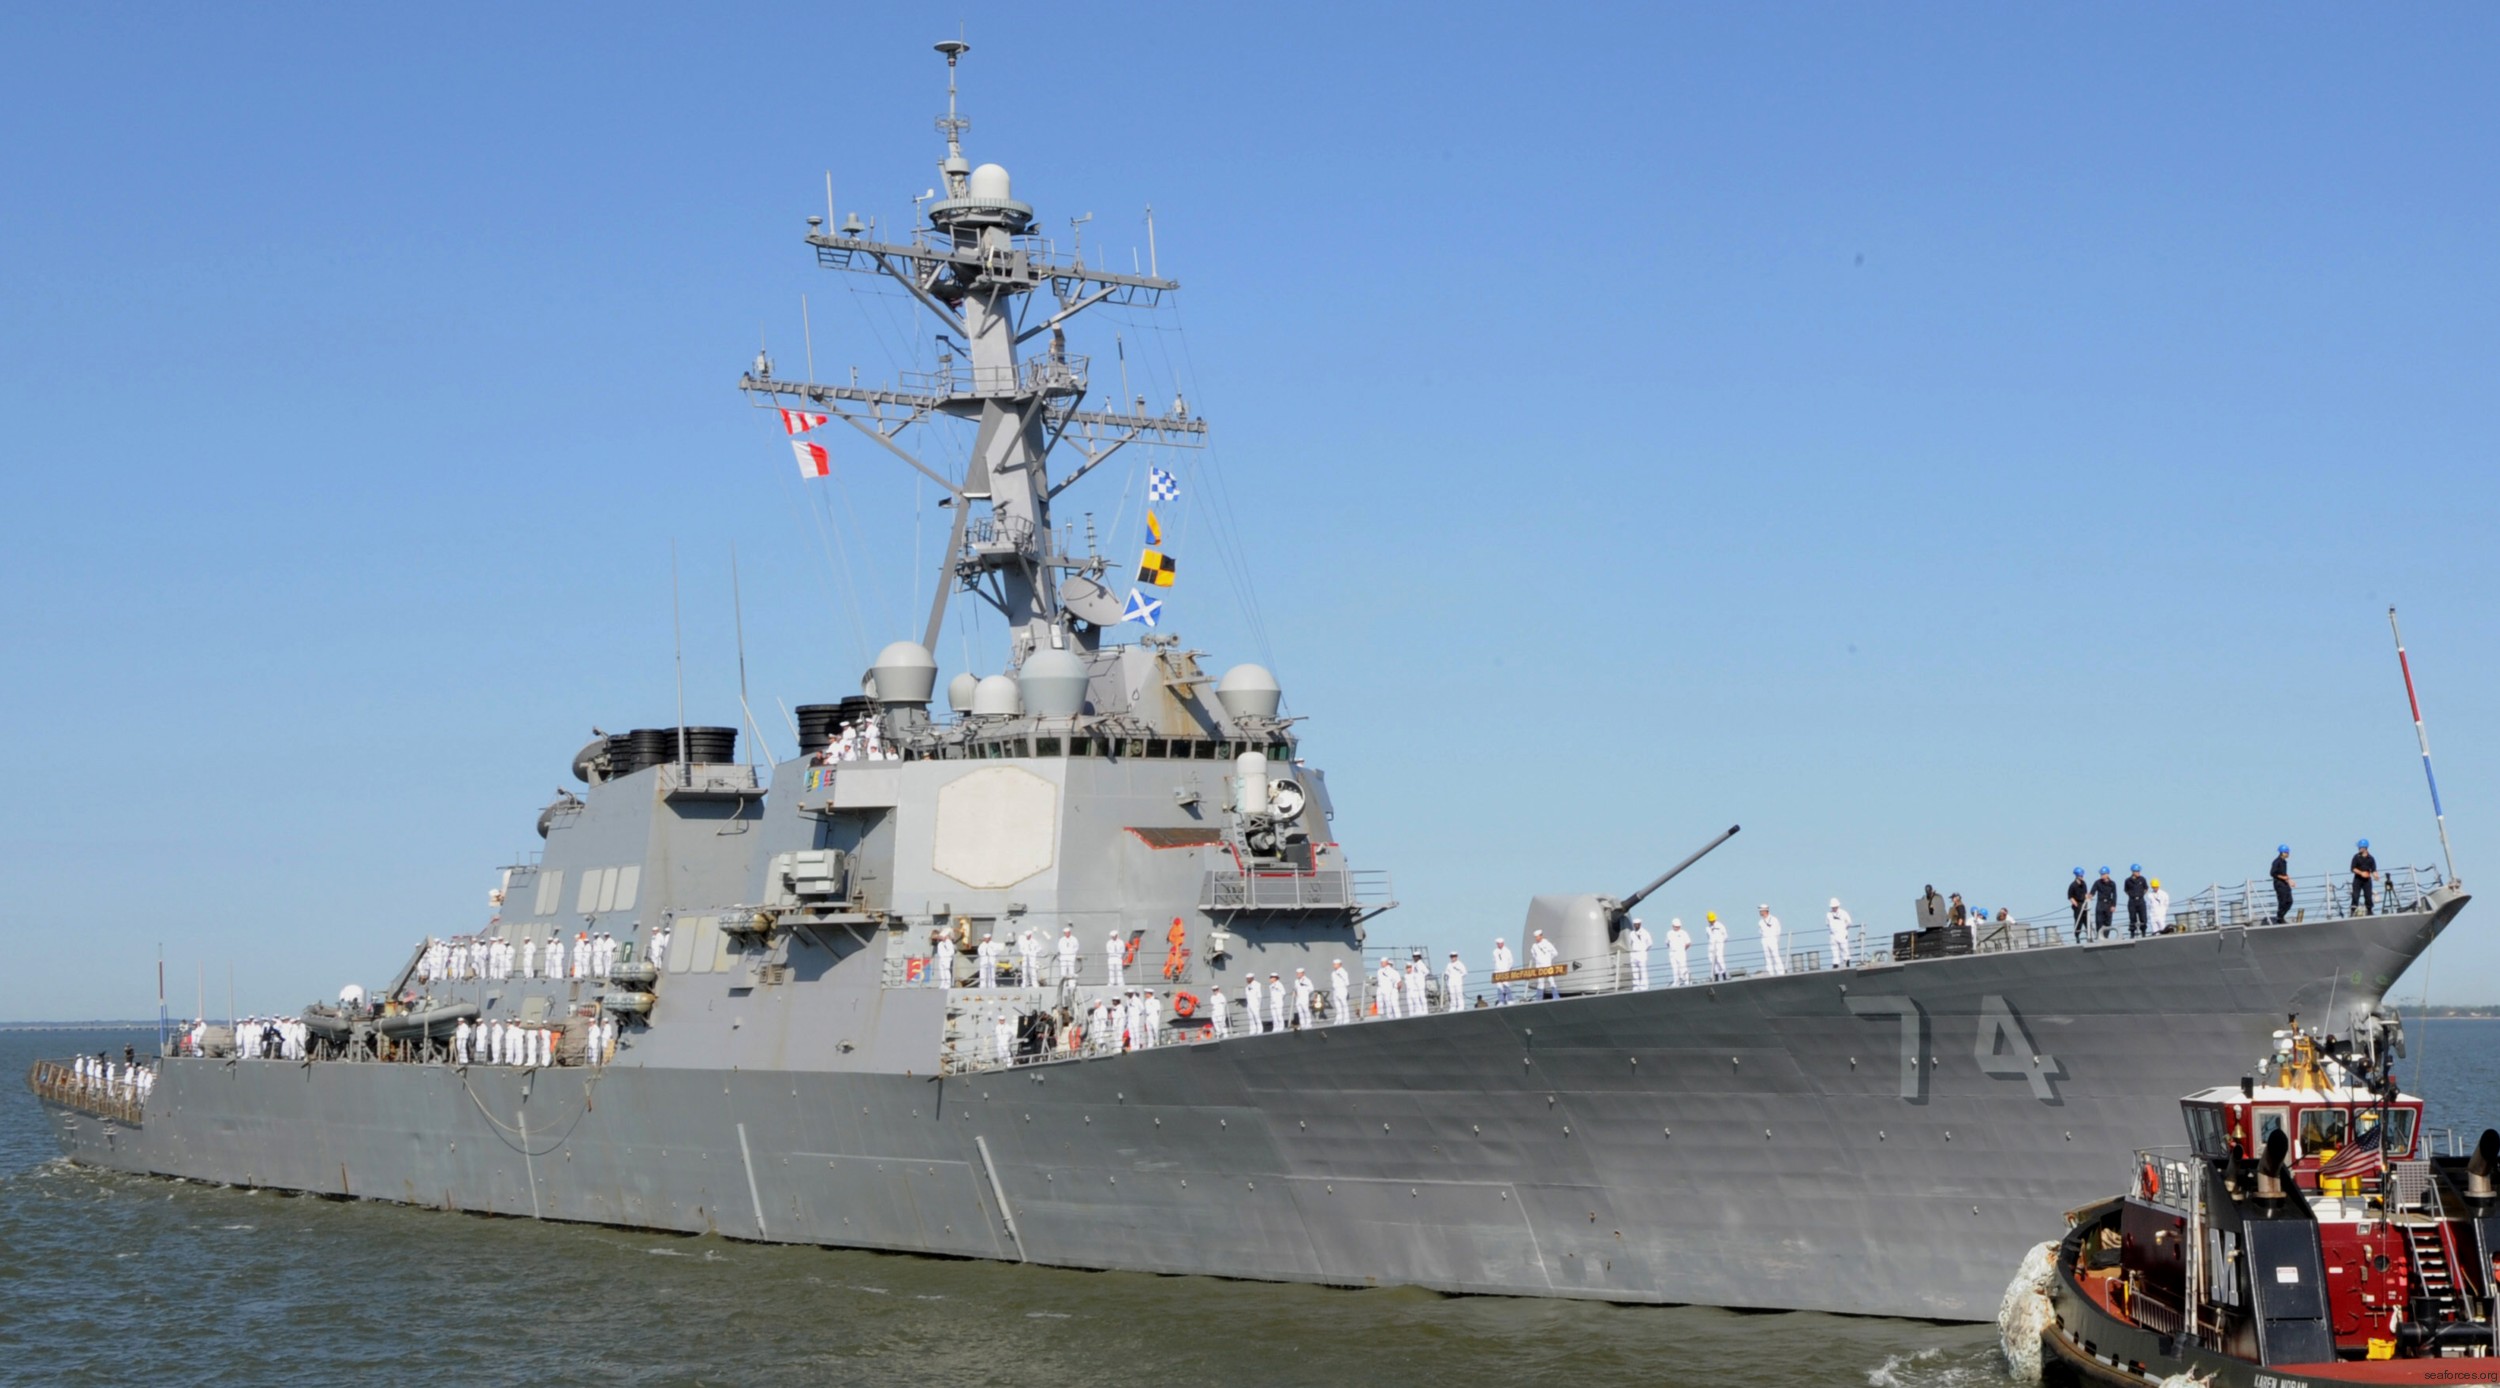 ddg-74 uss mcfaul guided missile destroyer arleigh burke class aegis bmd 27x ingalls shipbuilding pascagoula